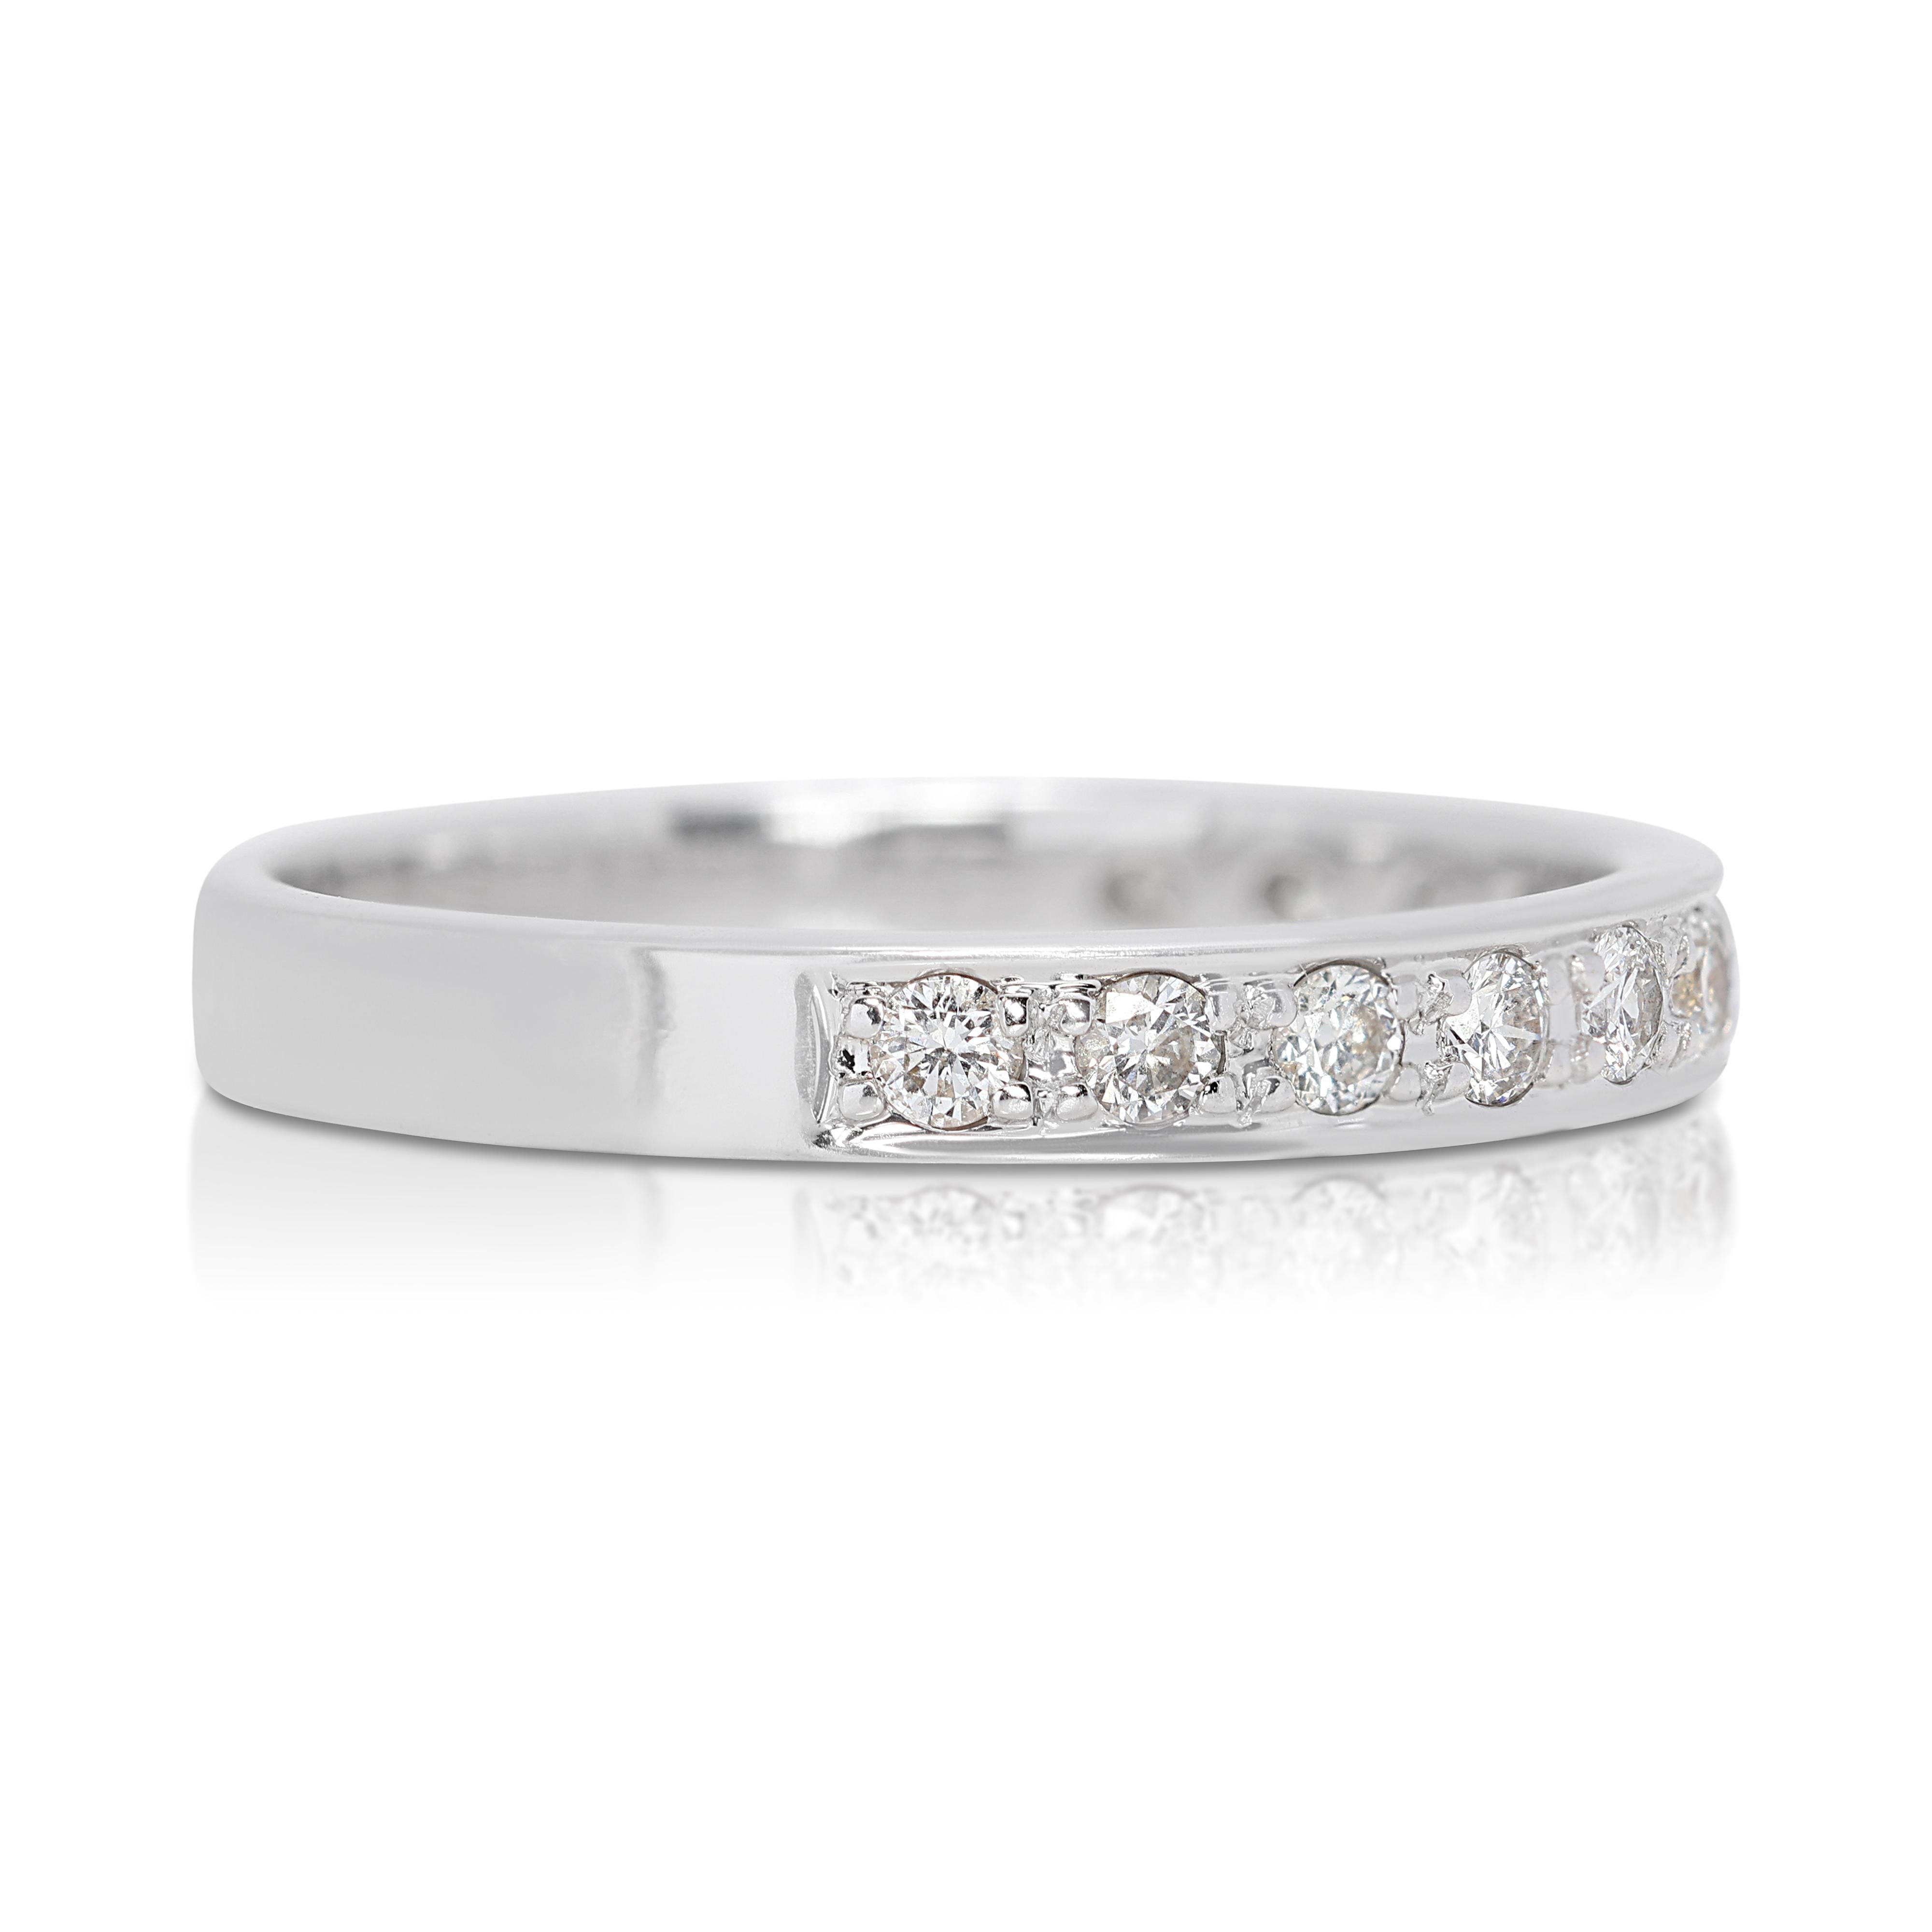  Luminous 0.18ct Diamonds Half Eternity Ring in 18K White Gold In Excellent Condition For Sale In רמת גן, IL